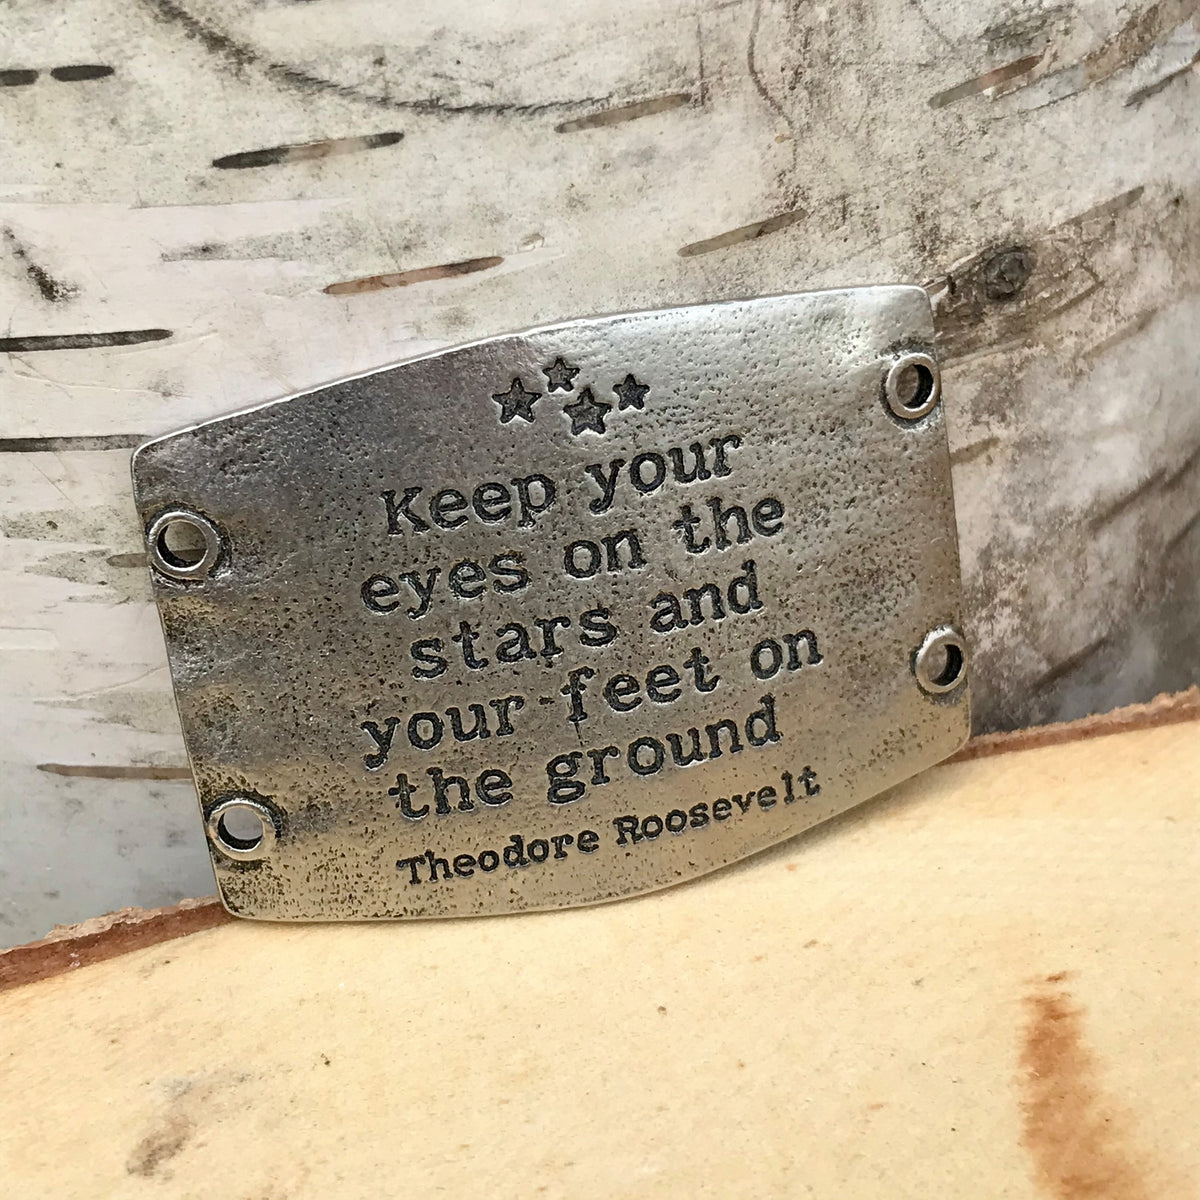 Antique silver finish Lenny & Eva bracelet sentiment that reads, "Keep your eyes on the stars and your feet on the ground." Quote by Theodore Roosevelt. Design of stars above the quote.